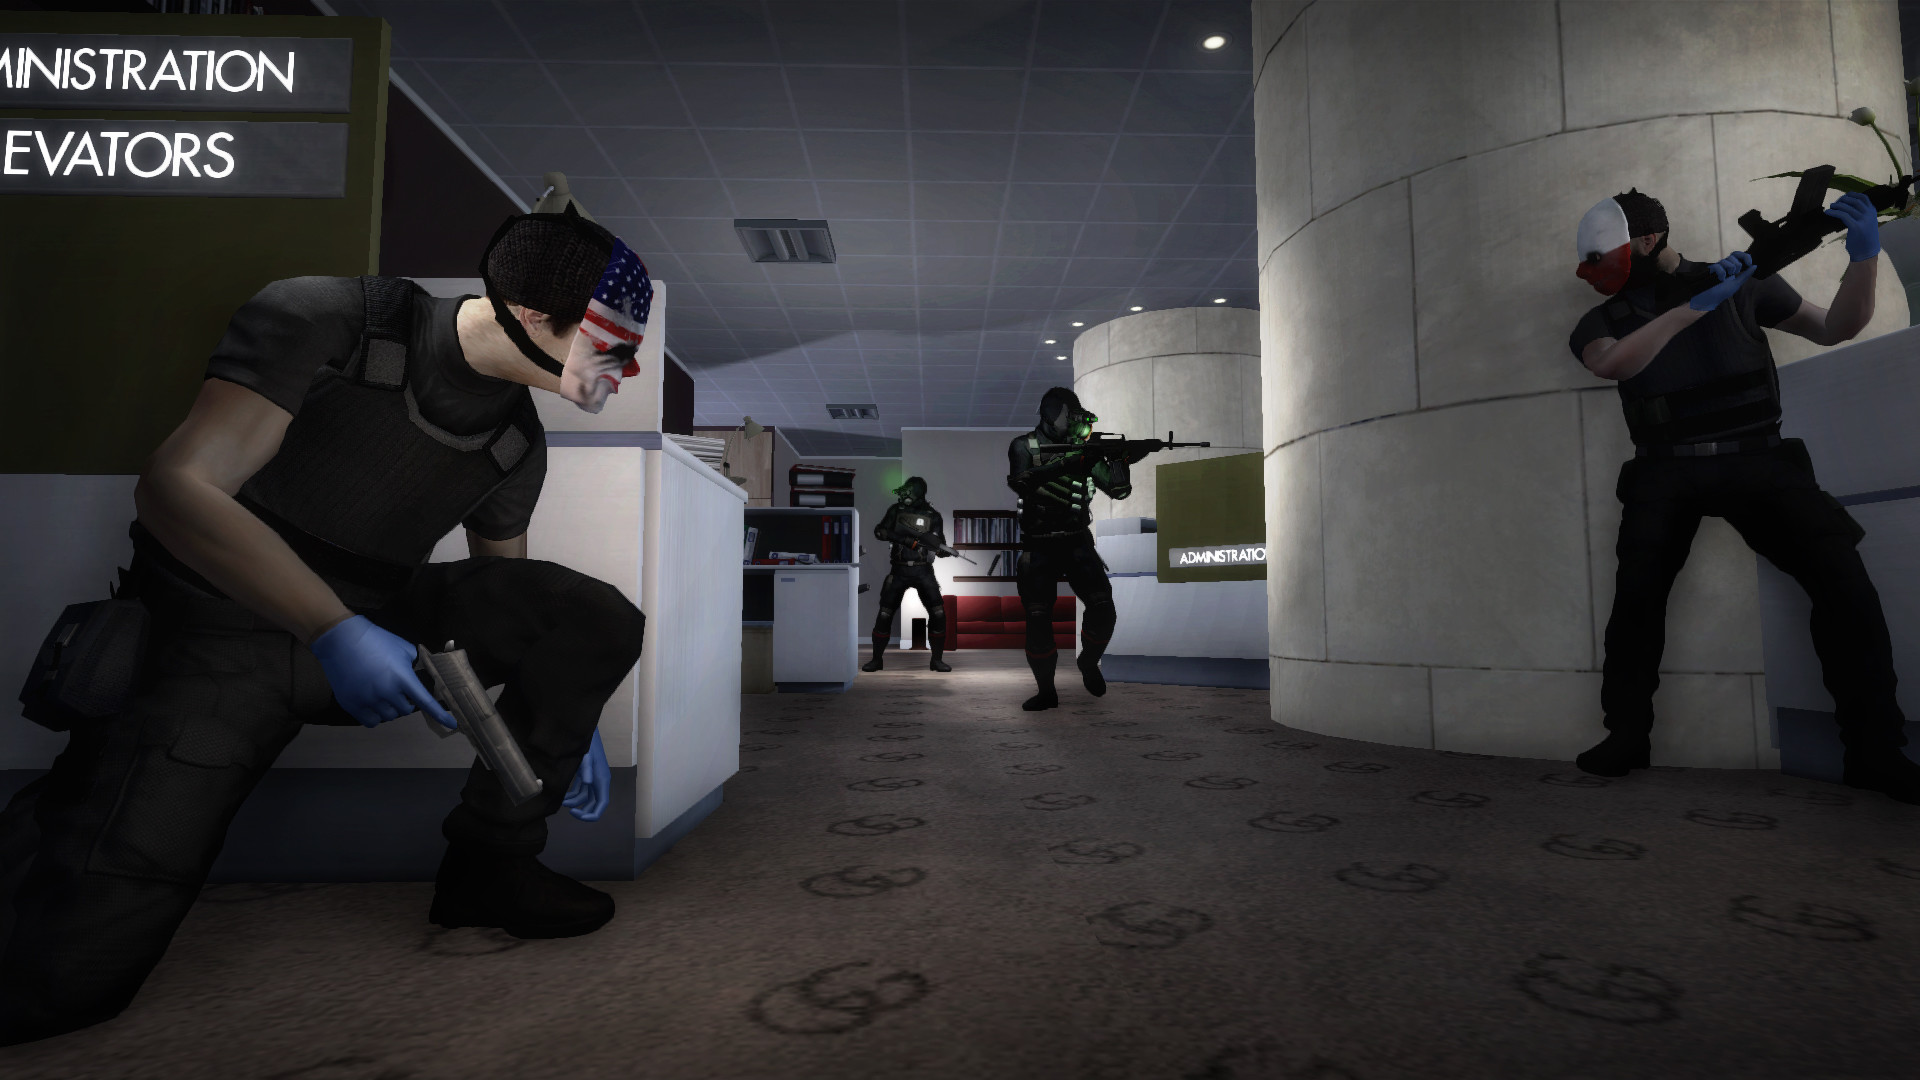 1920x1080 ... Amazon.com: PAYDAY The Heist [Download]: Video Games ...